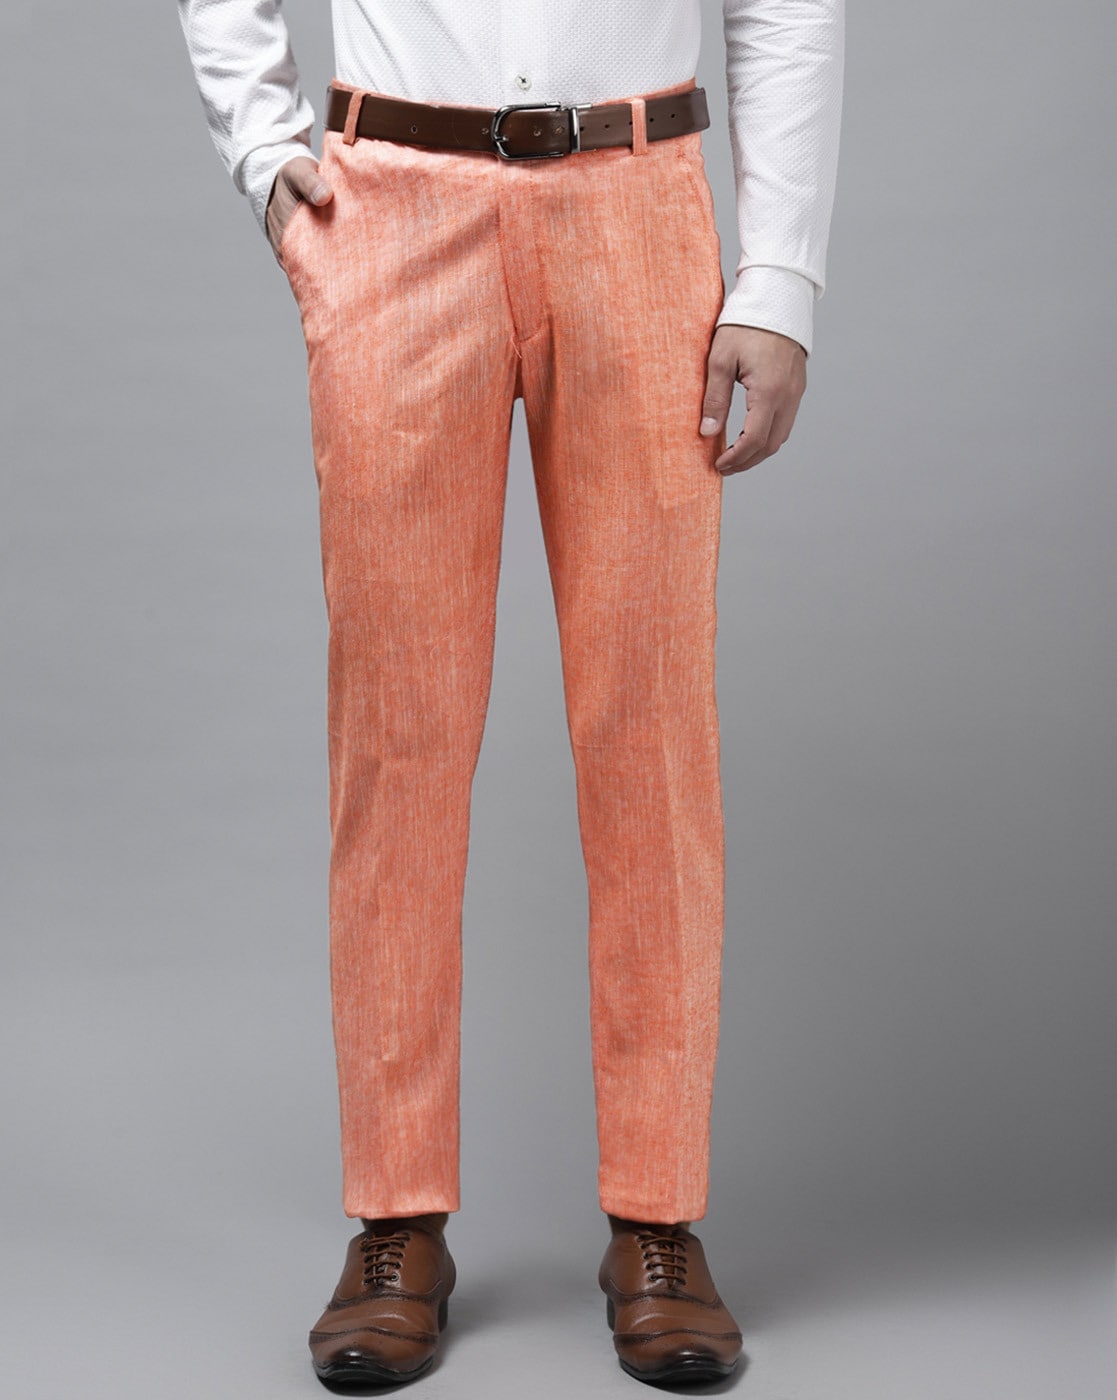 Orange Pleated Trousers by Paul Smith on Sale